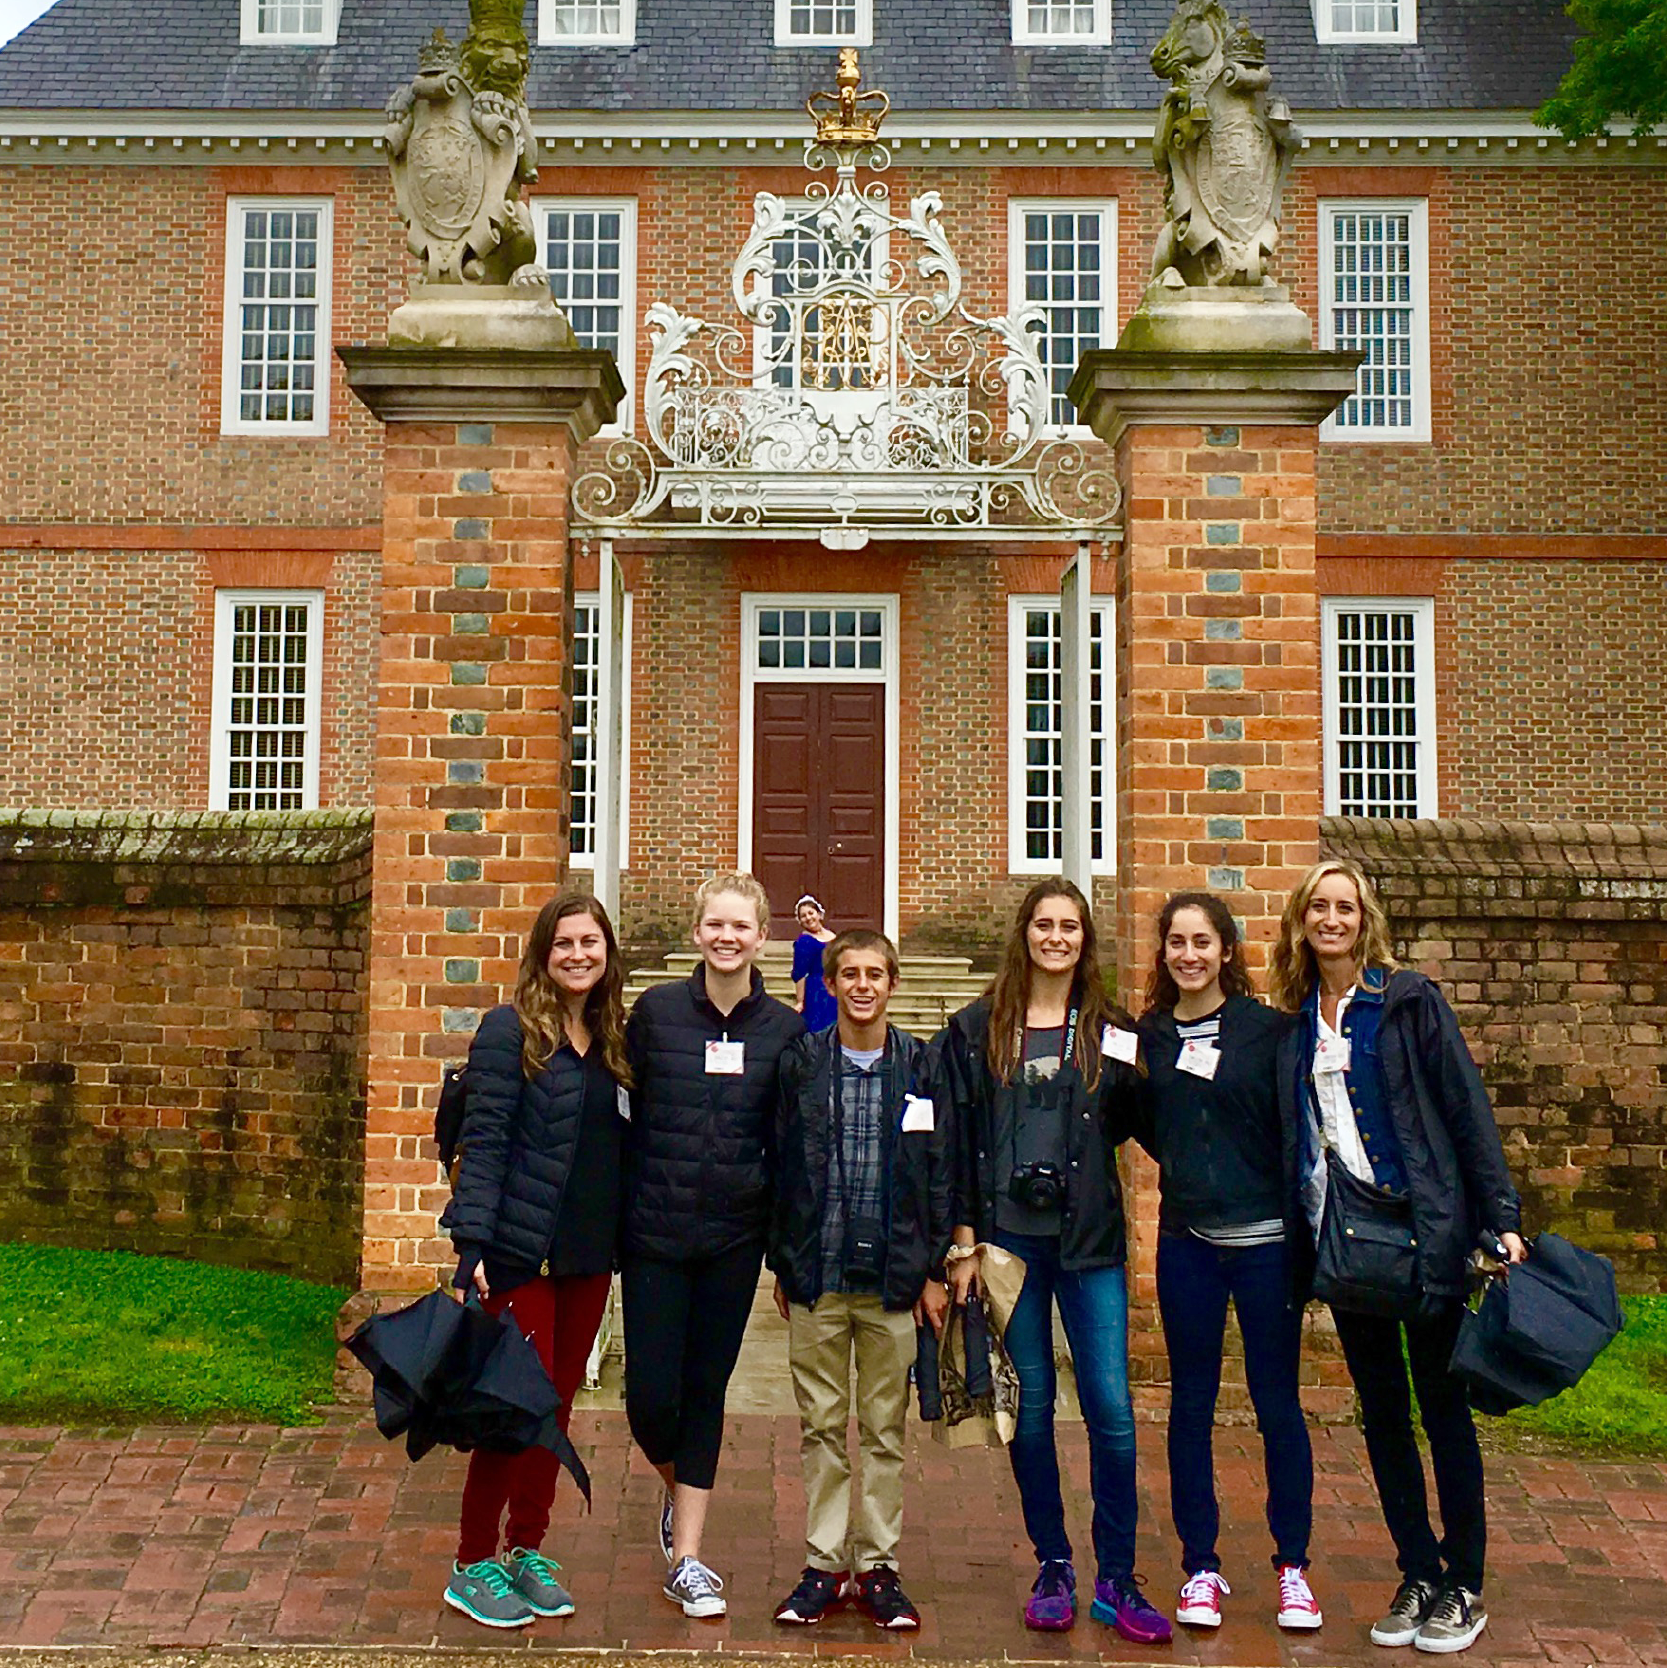 tour group outside the Governor's Palace in Williamsburg, Virginia